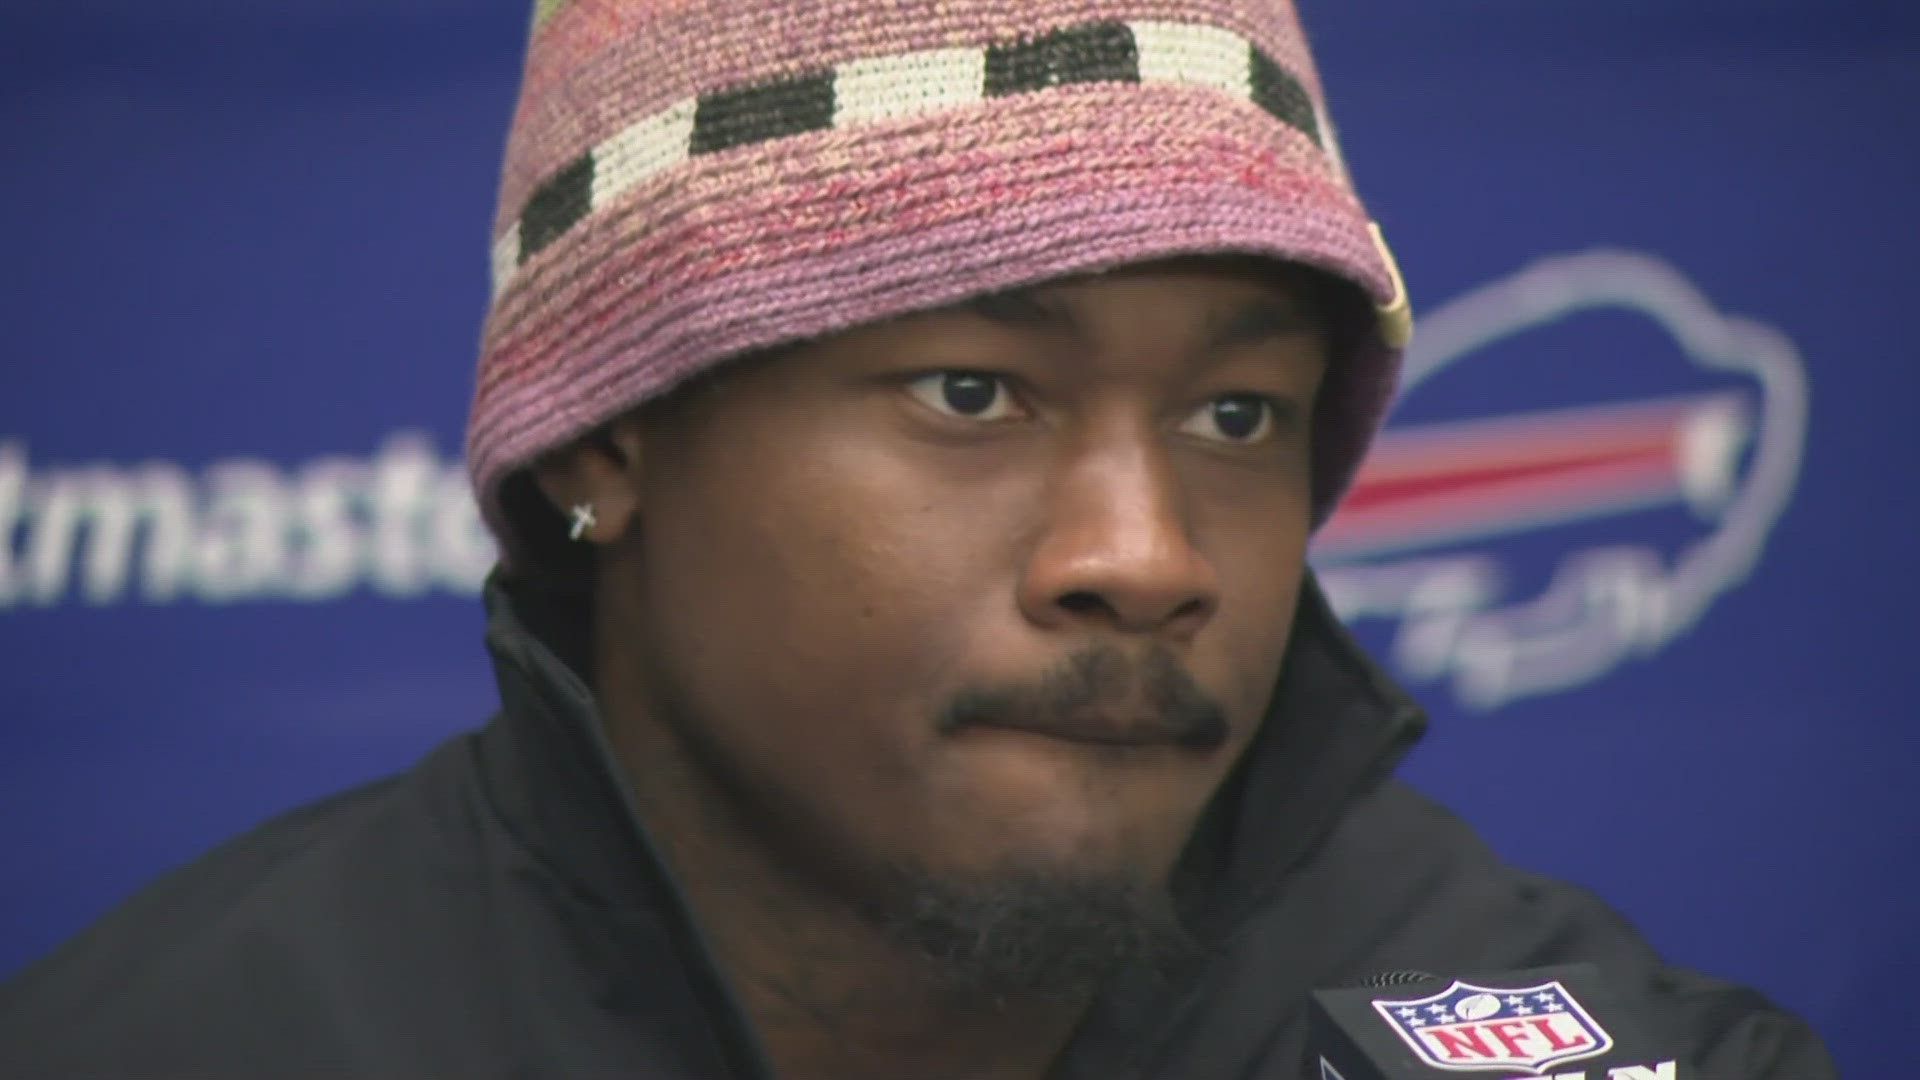 Stefon Diggs spoke at a news conference on Thursday, ahead of a Week 2 home game vs. the Las Vegas Raiders.